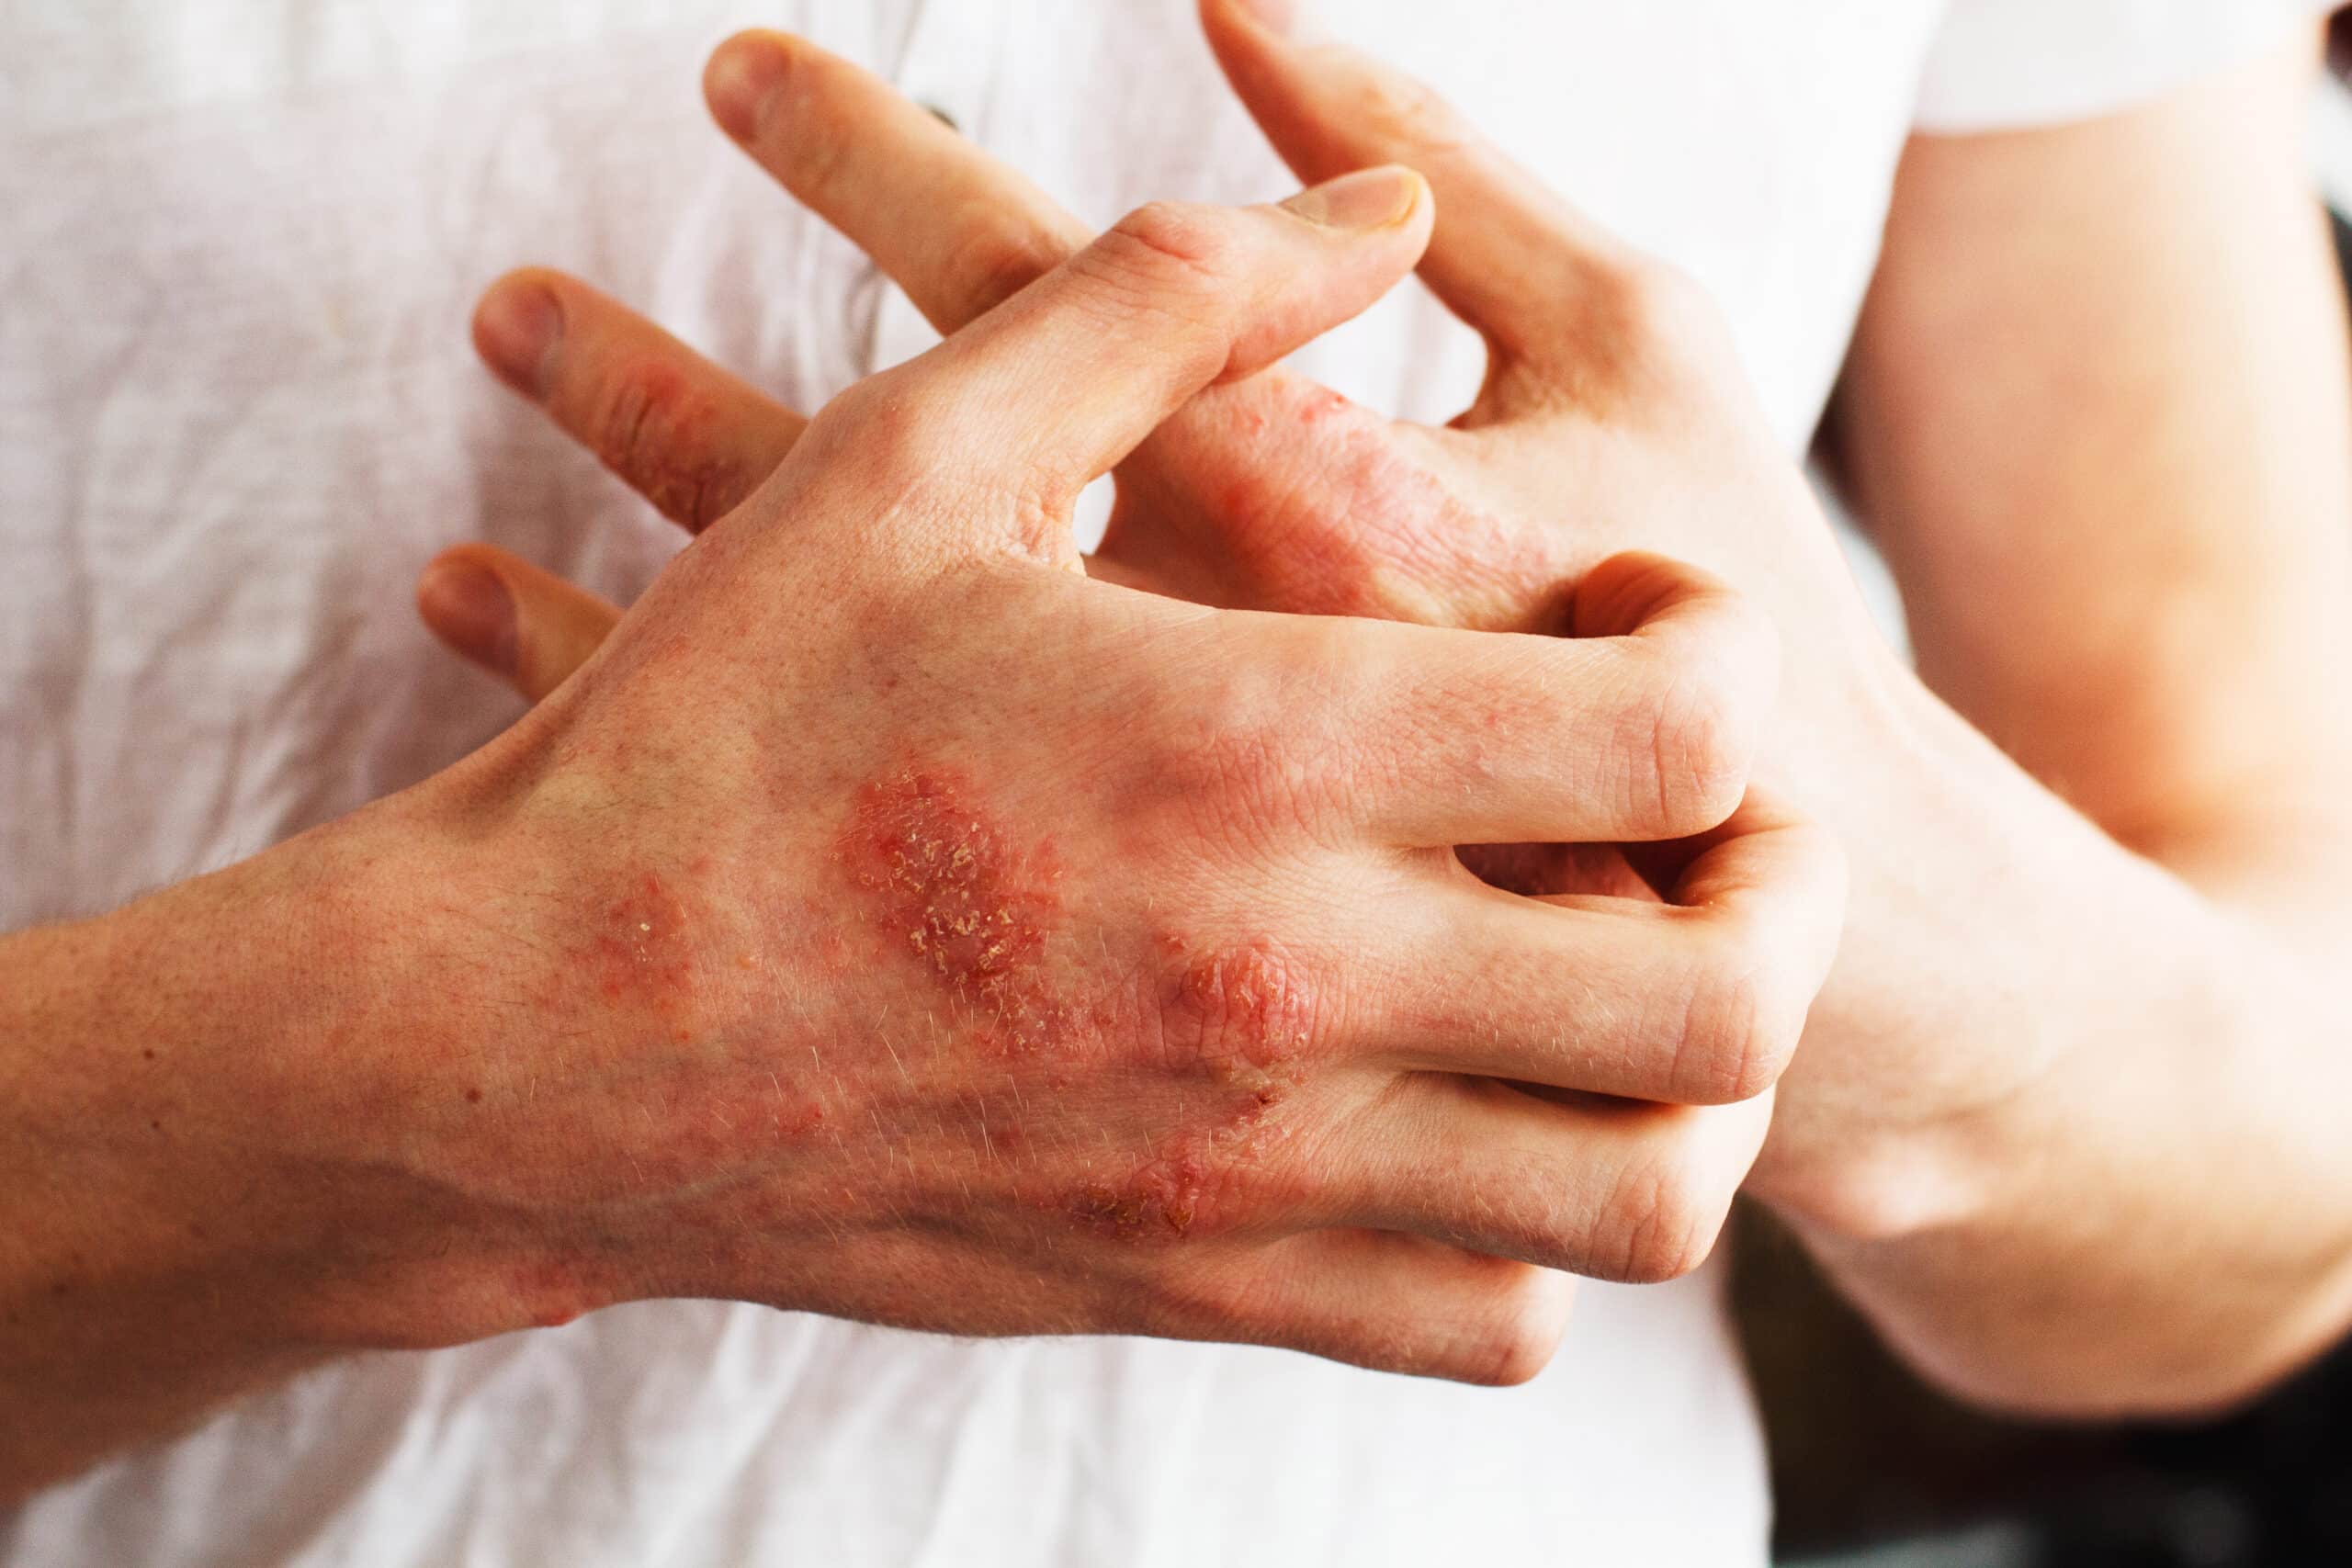 Man scratch oneself, dry flaky skin on hand with psoriasis vulgaris, eczema and other skin conditions like fungus, plaque, rash and patches.